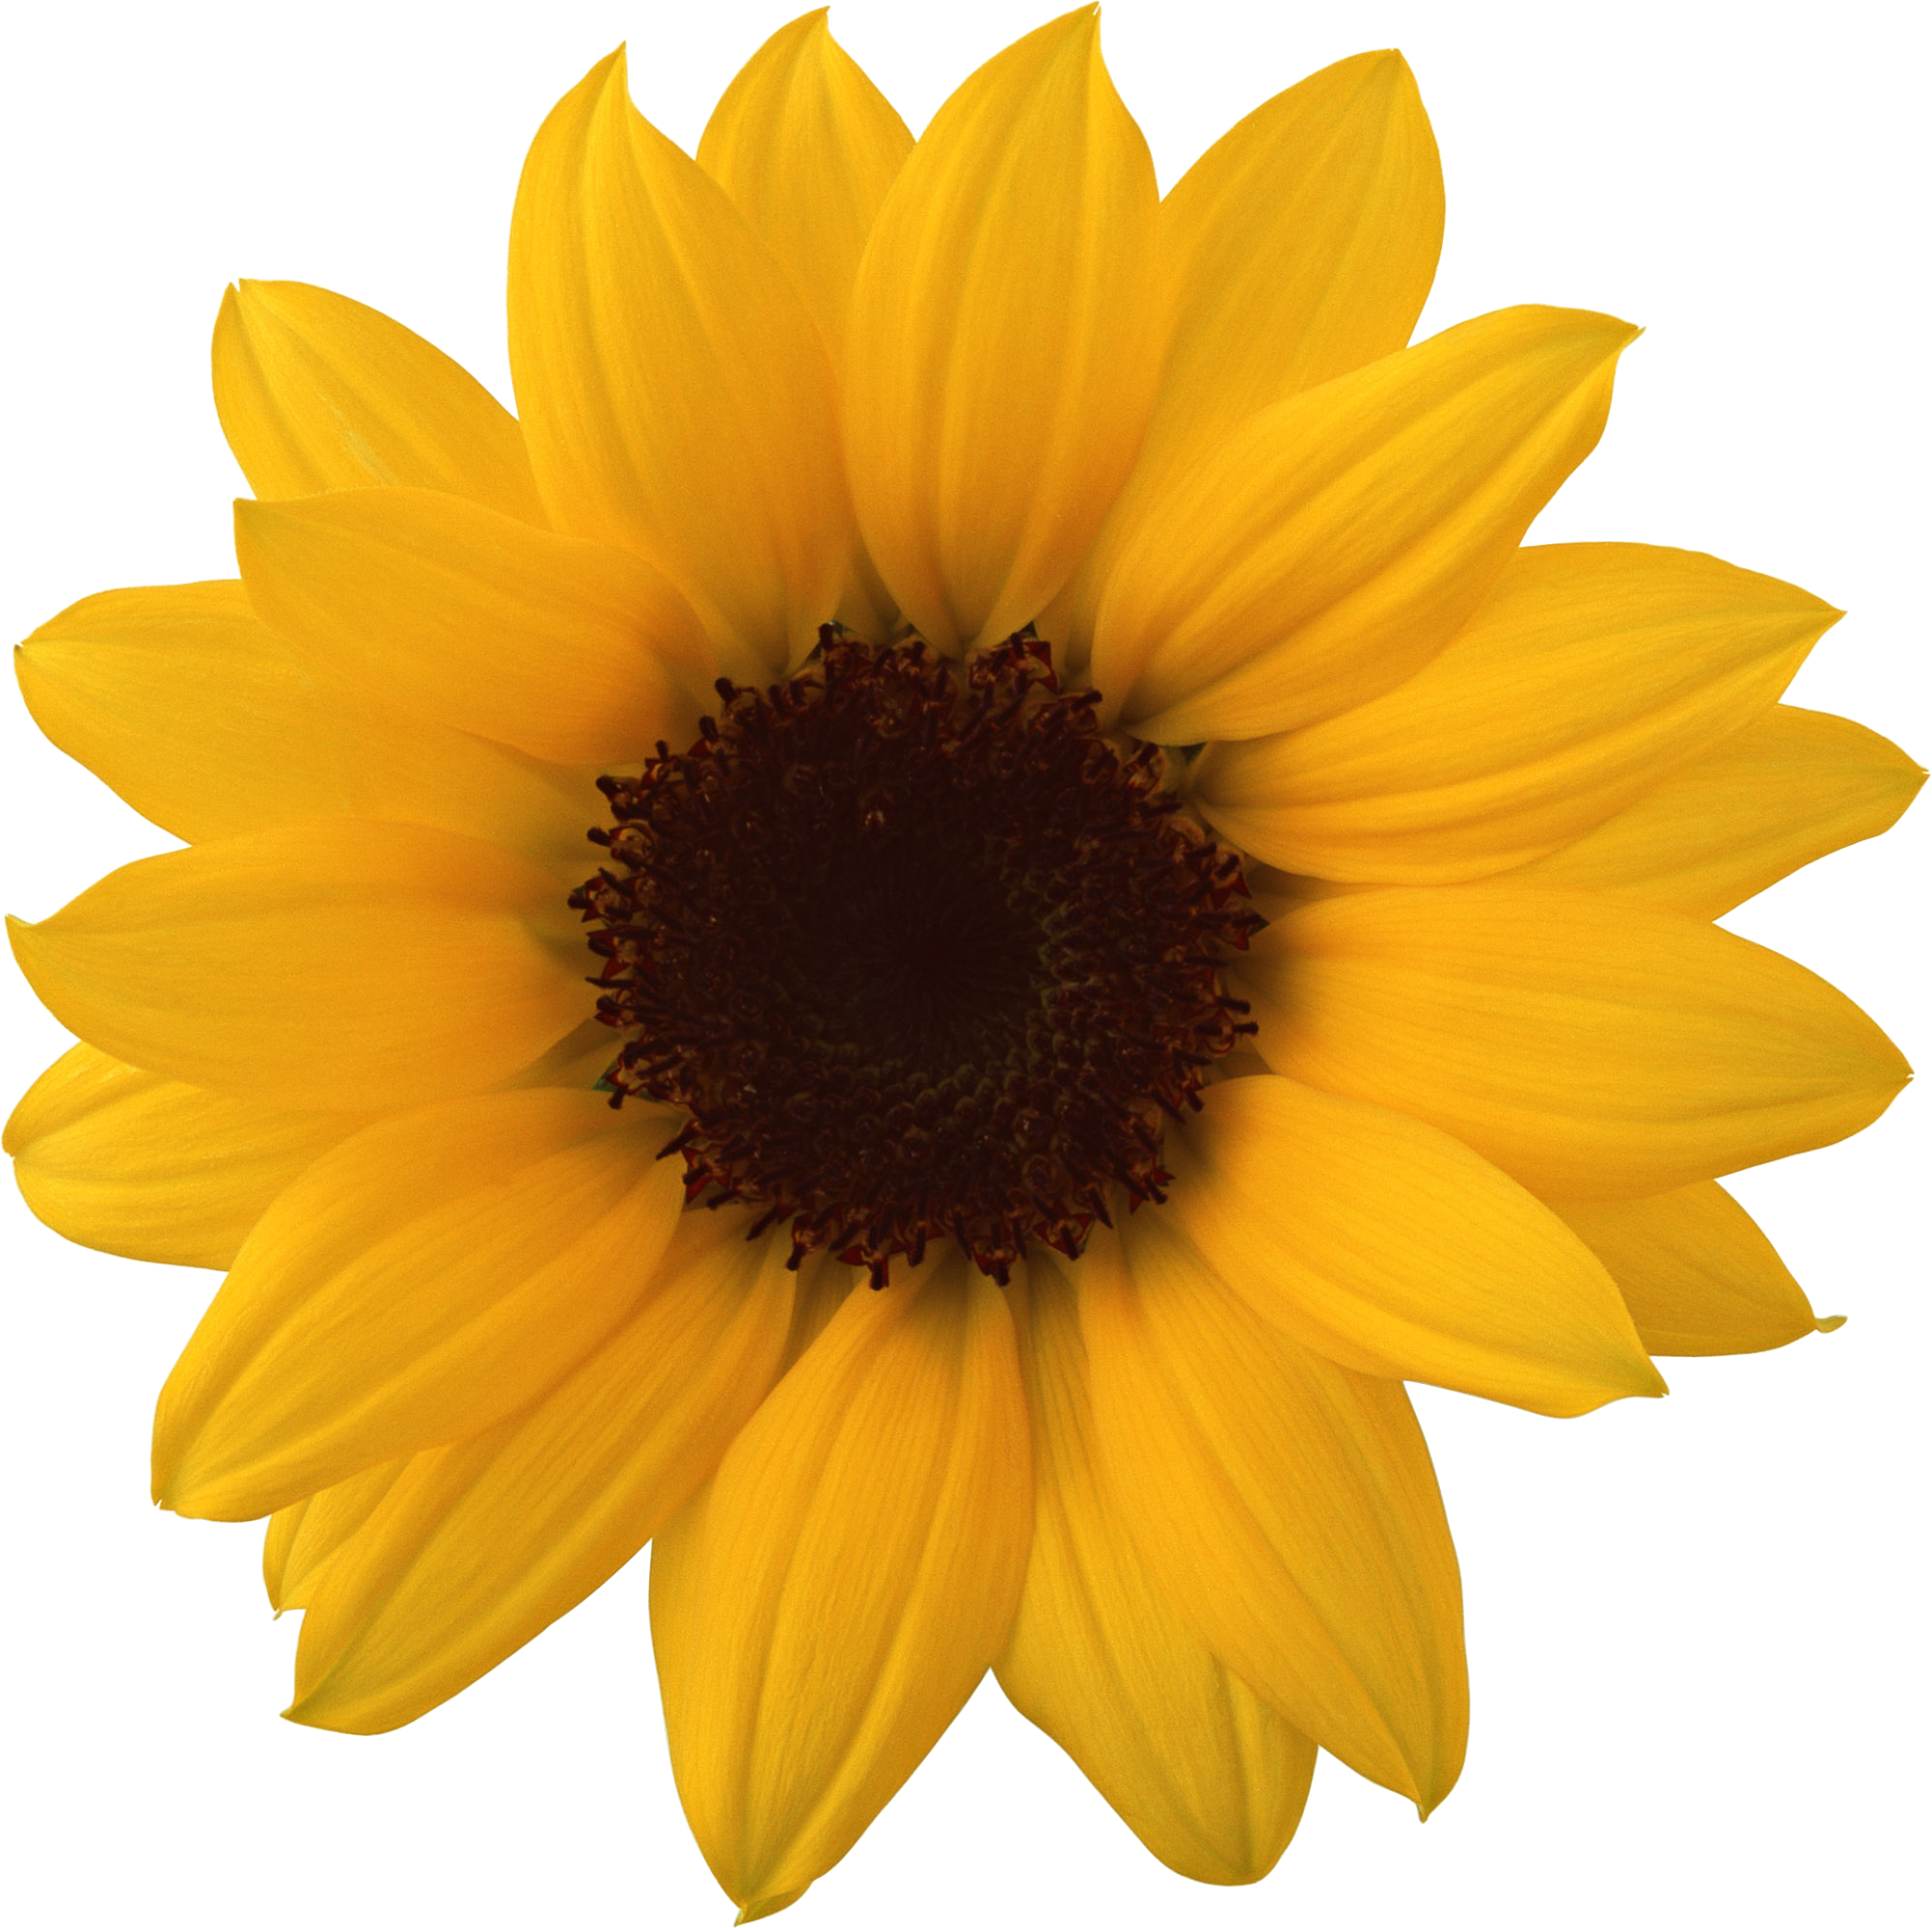 Sunflower PNG images